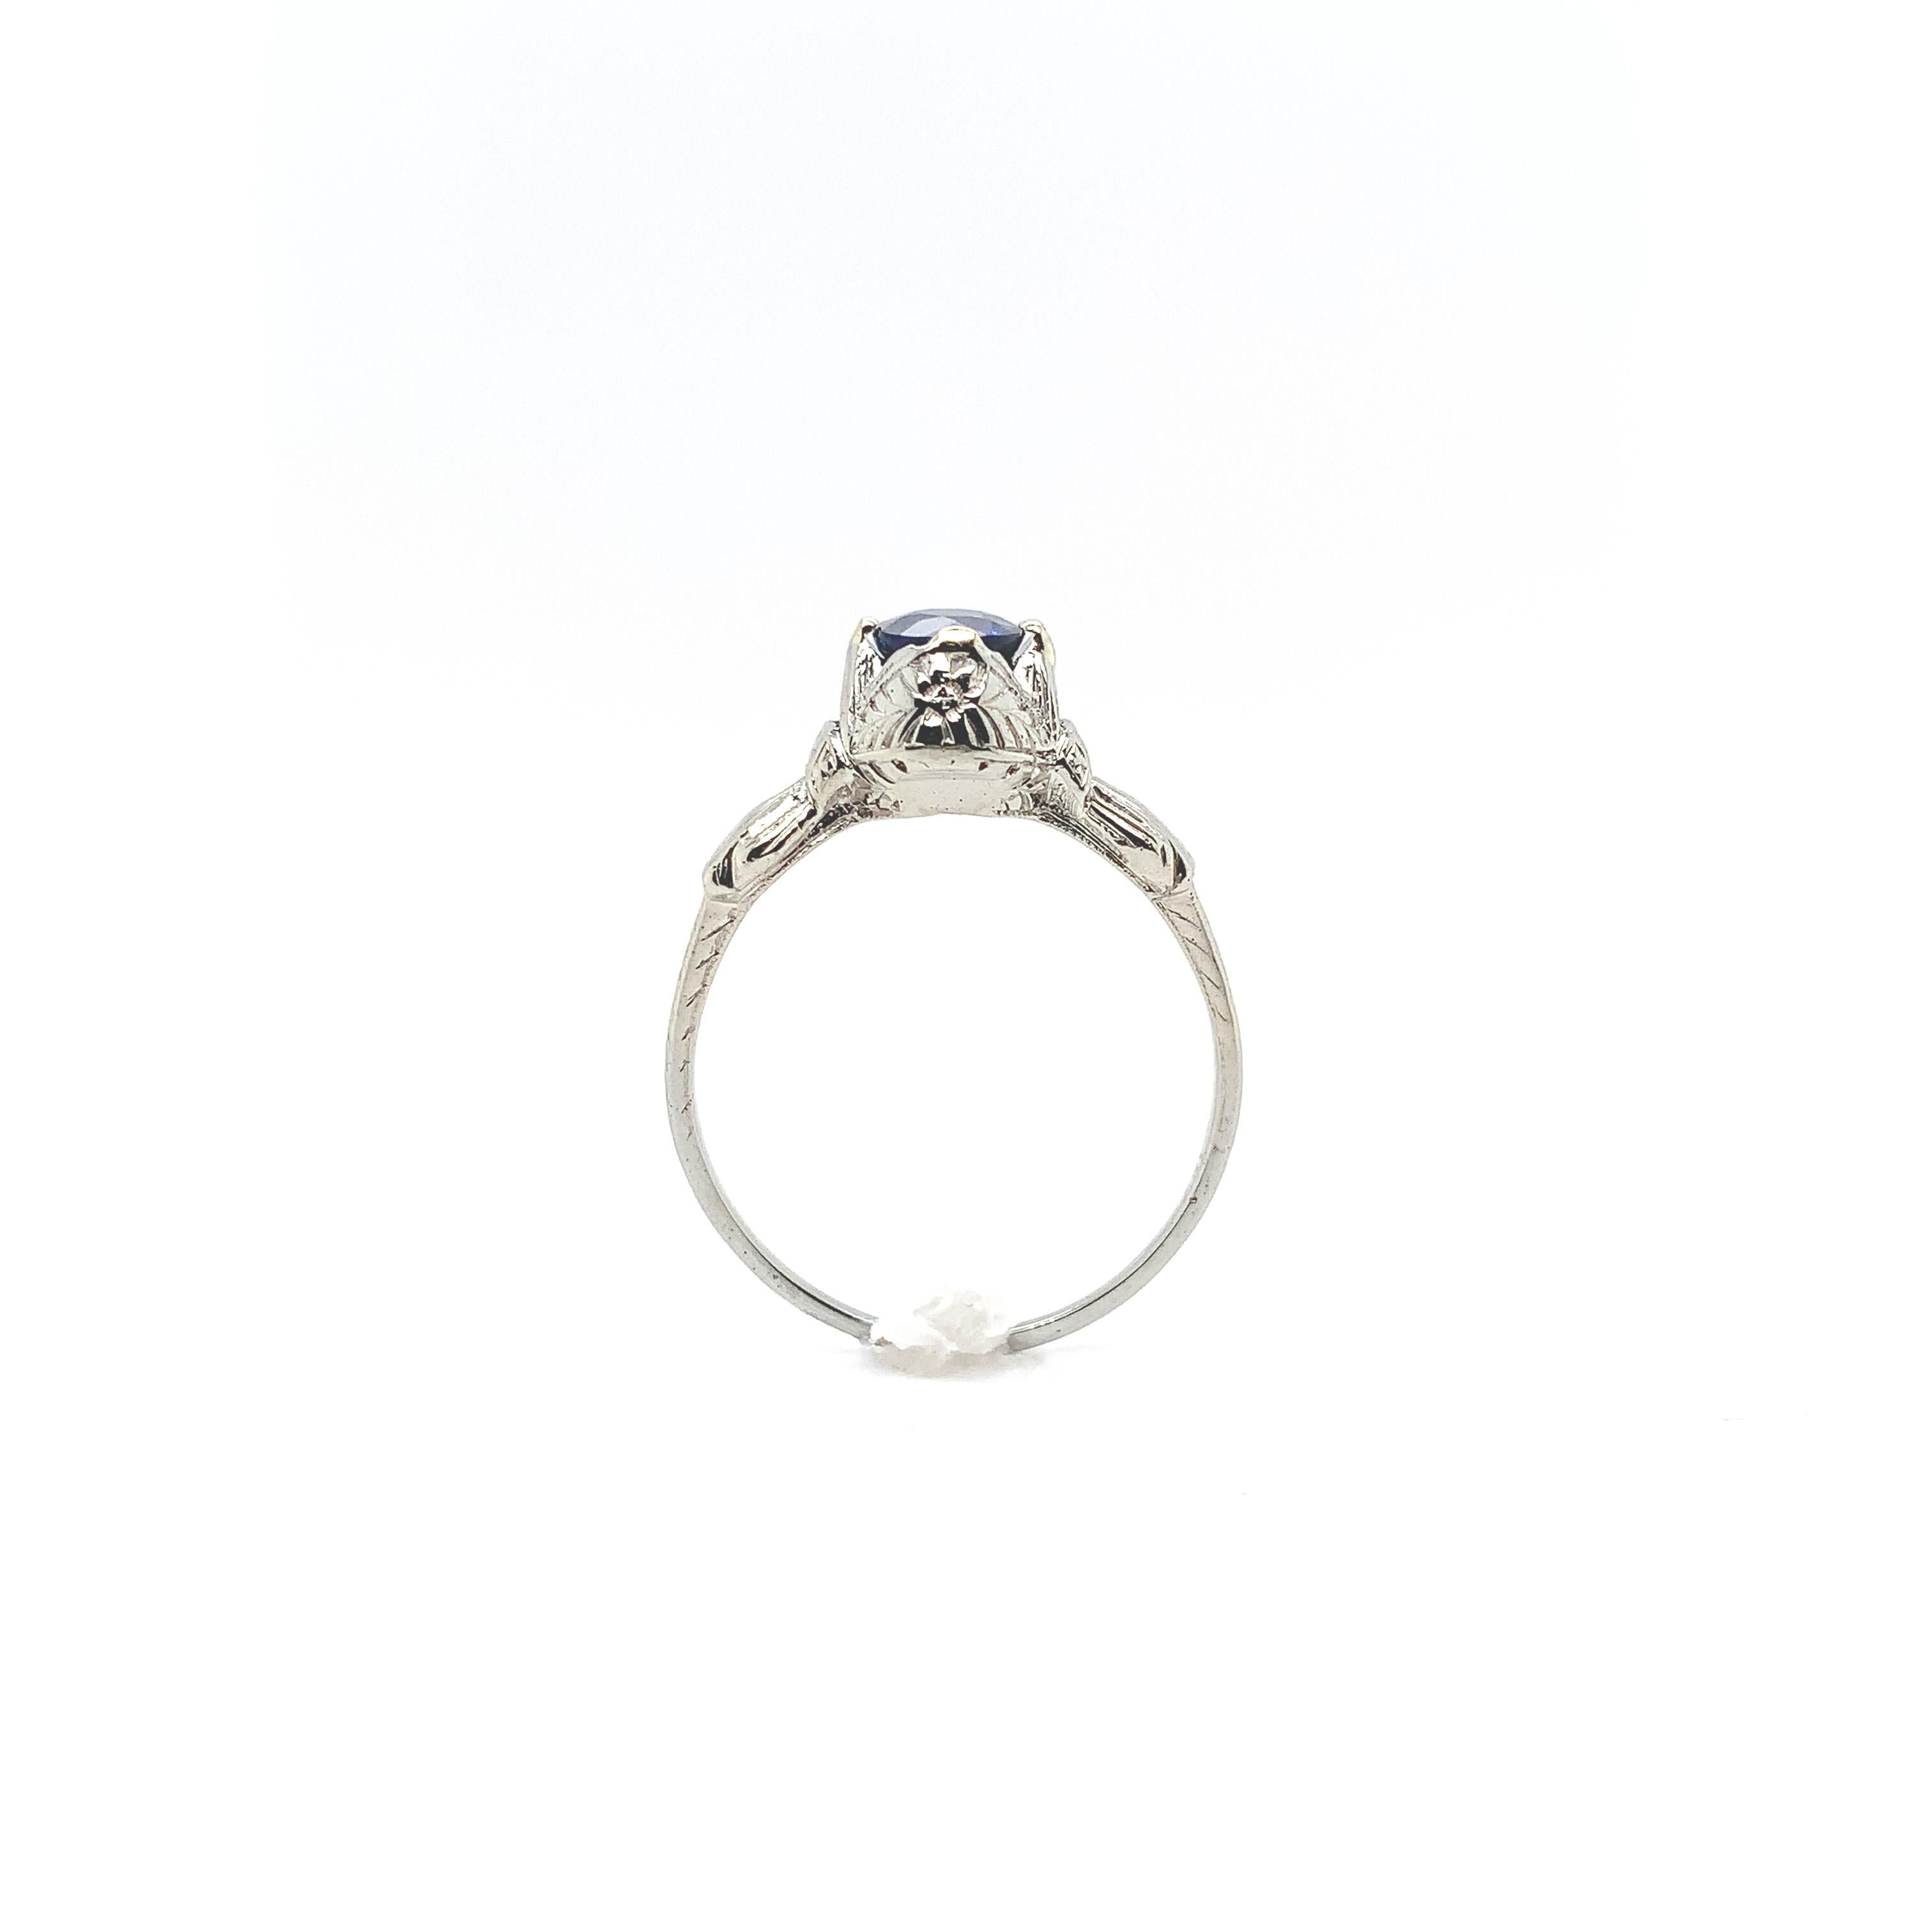 18K white gold ring featuring a genuine blue sapphire weighing .79ct. The round sapphire measures about 5.3mm. The setting is hand engraved on 3 sides. There is some wear to the underside where rings were worn beside this one. The prongs have all